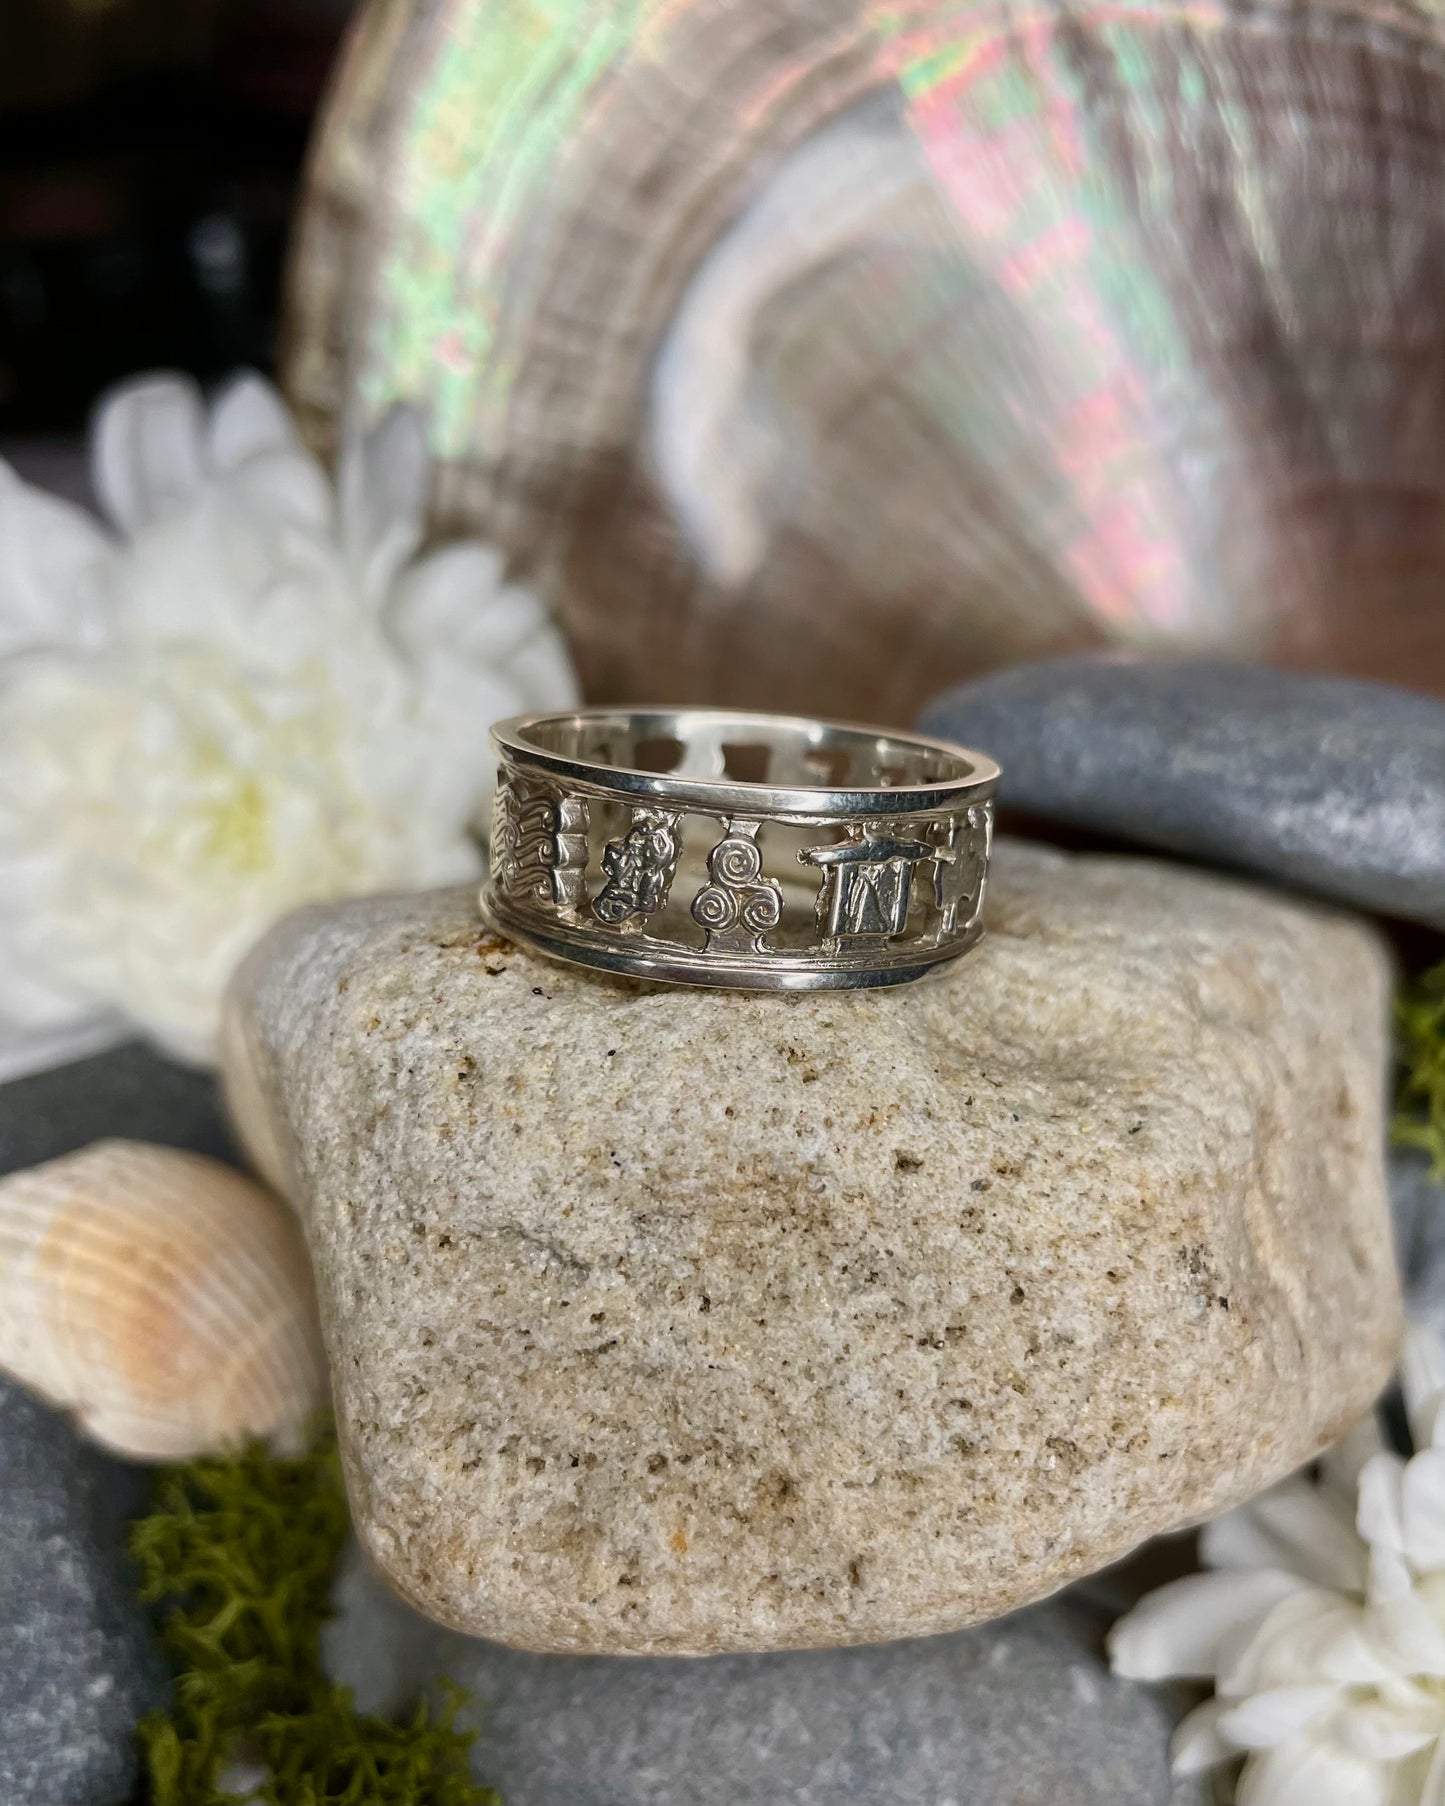 Ring of Ireland Sterling Silver Openback